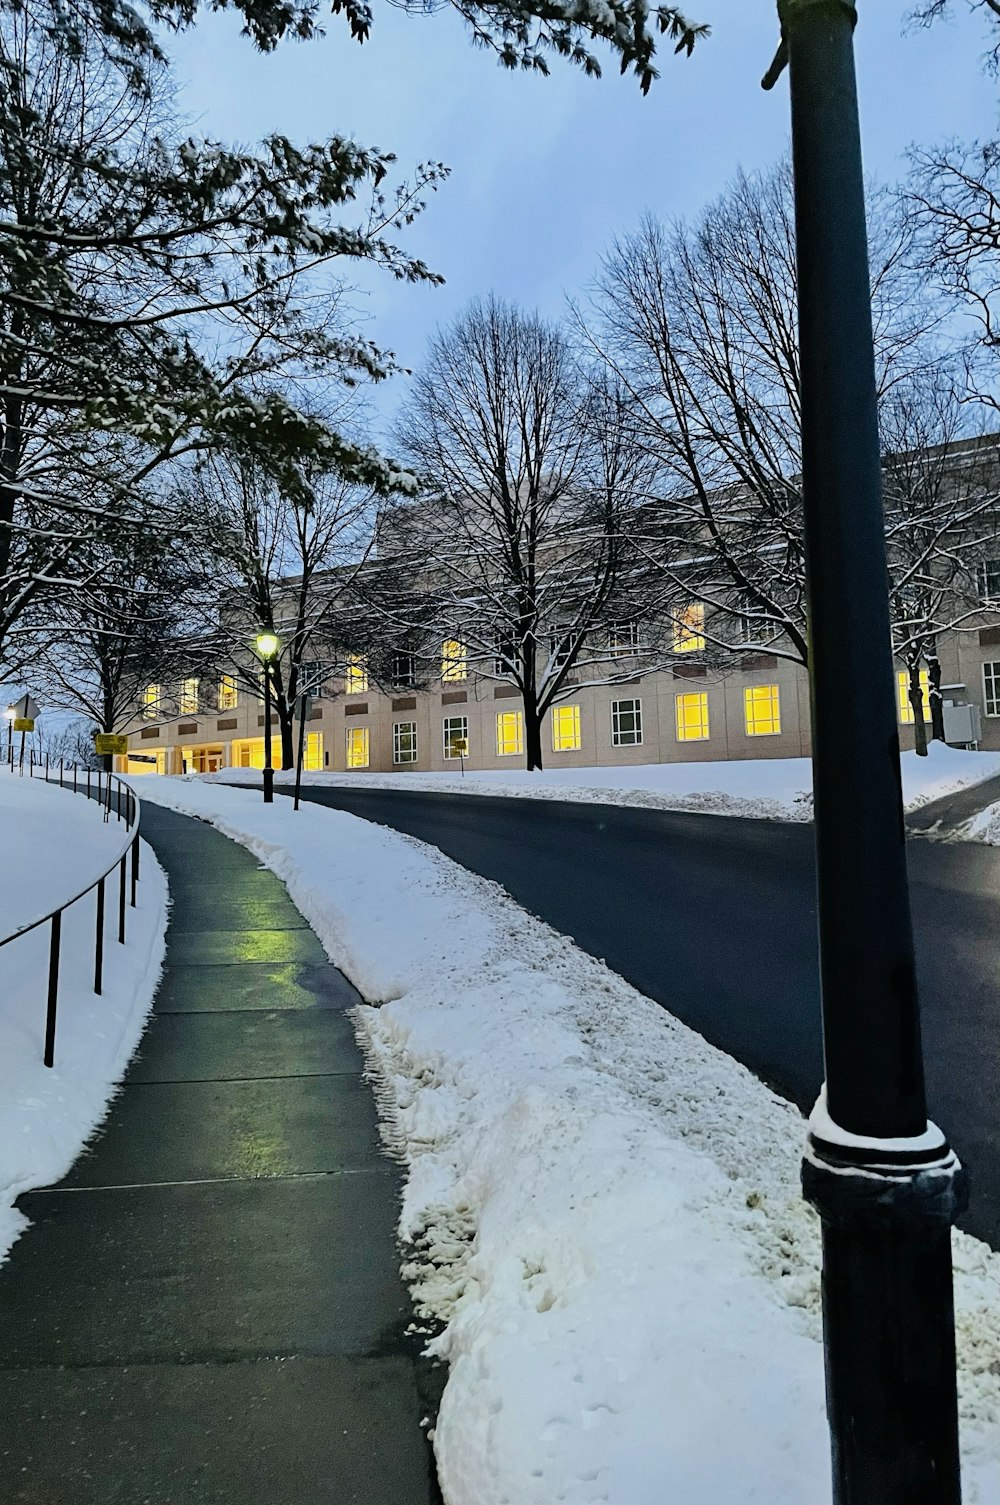 a street light on a snowy street in front of a building